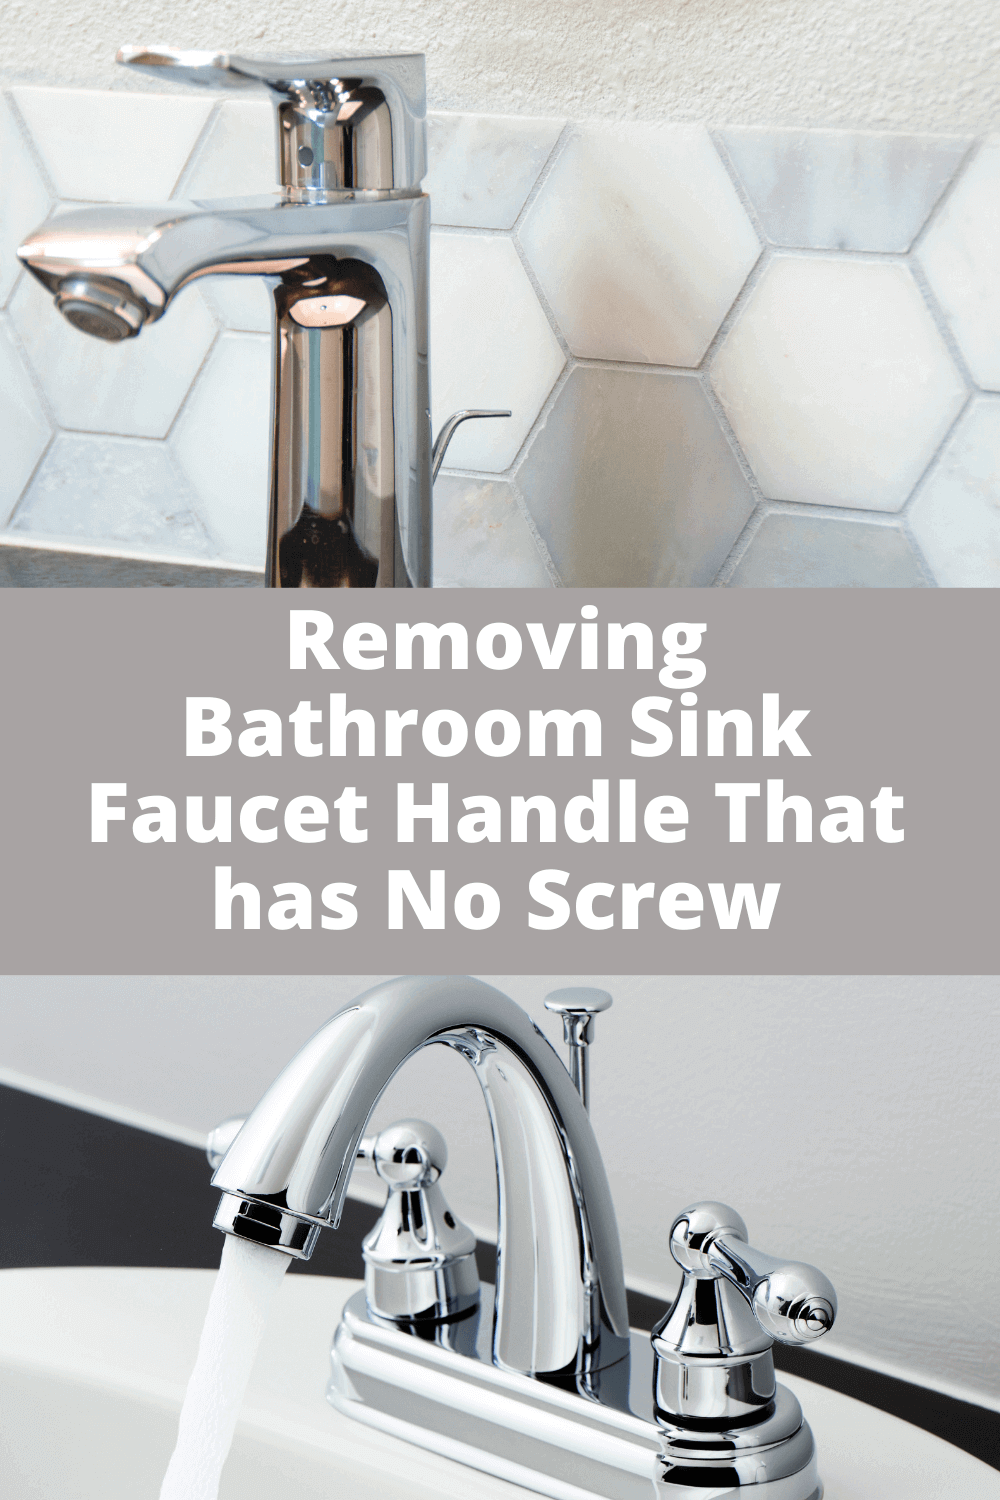 How to Remove Bathroom Sink Faucet Handle That has No Screw